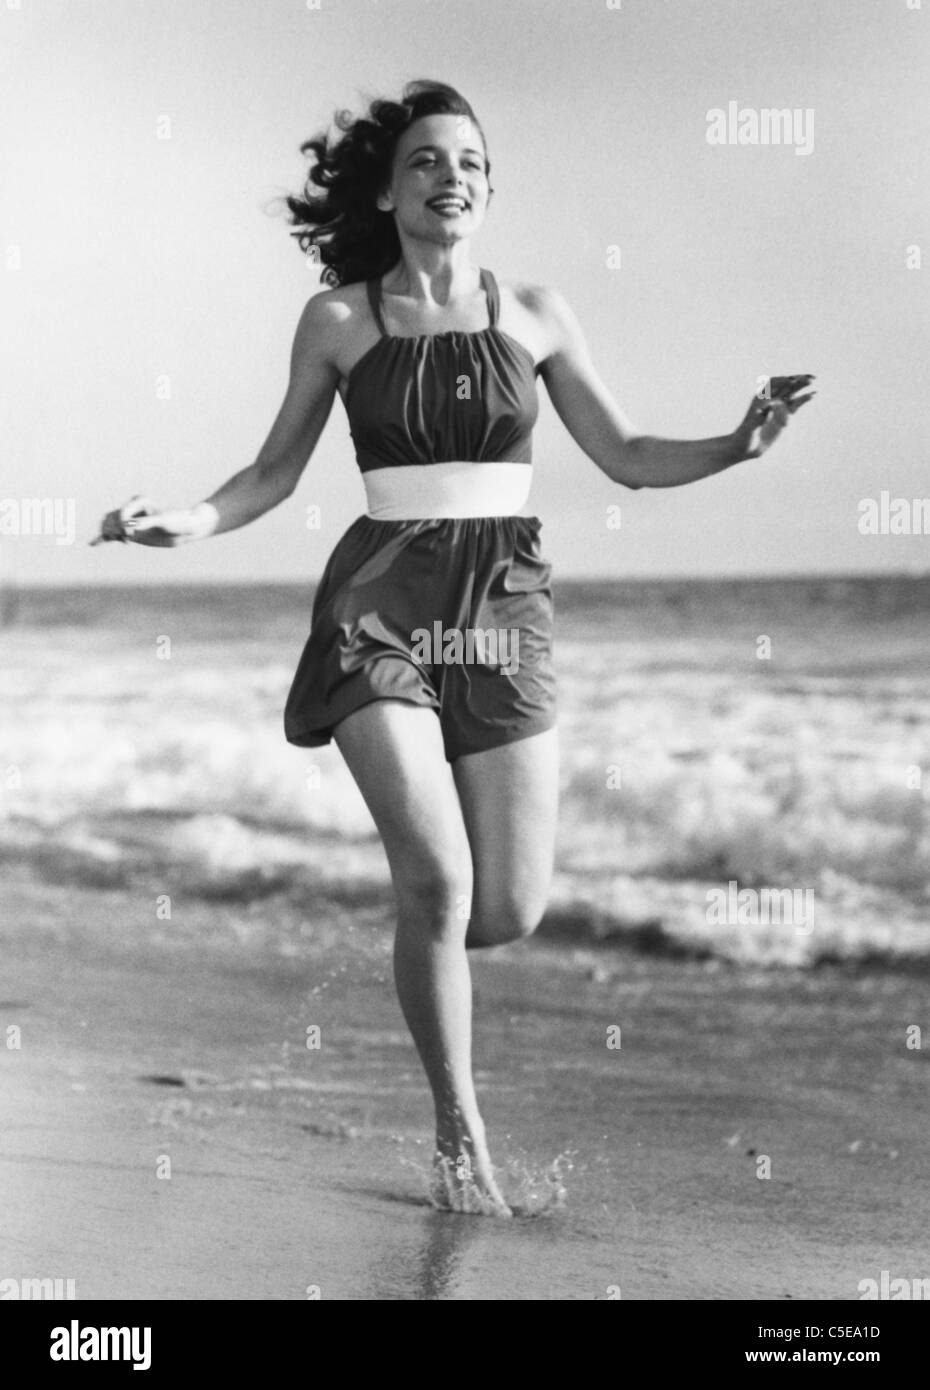 Cheerful young woman running on beach Stock Photo